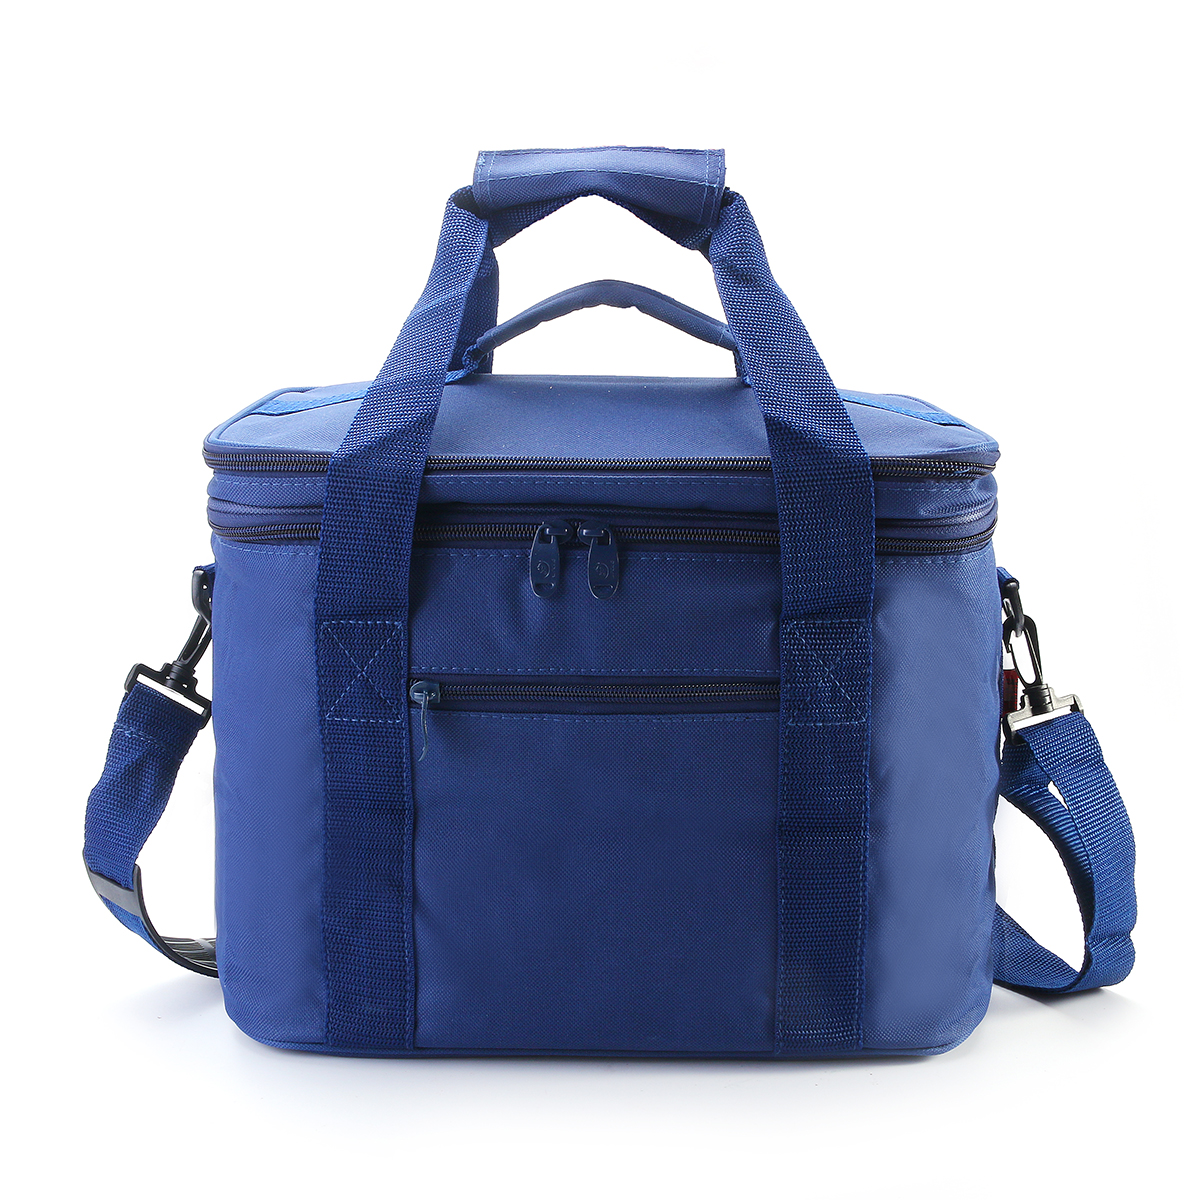 33x20x27cm-Oxford-Double-layer-Insulated-Lunch-Bag-Large-Capacity-Travel-Outdoor-Picnic-Tote-Bag-1199100-3